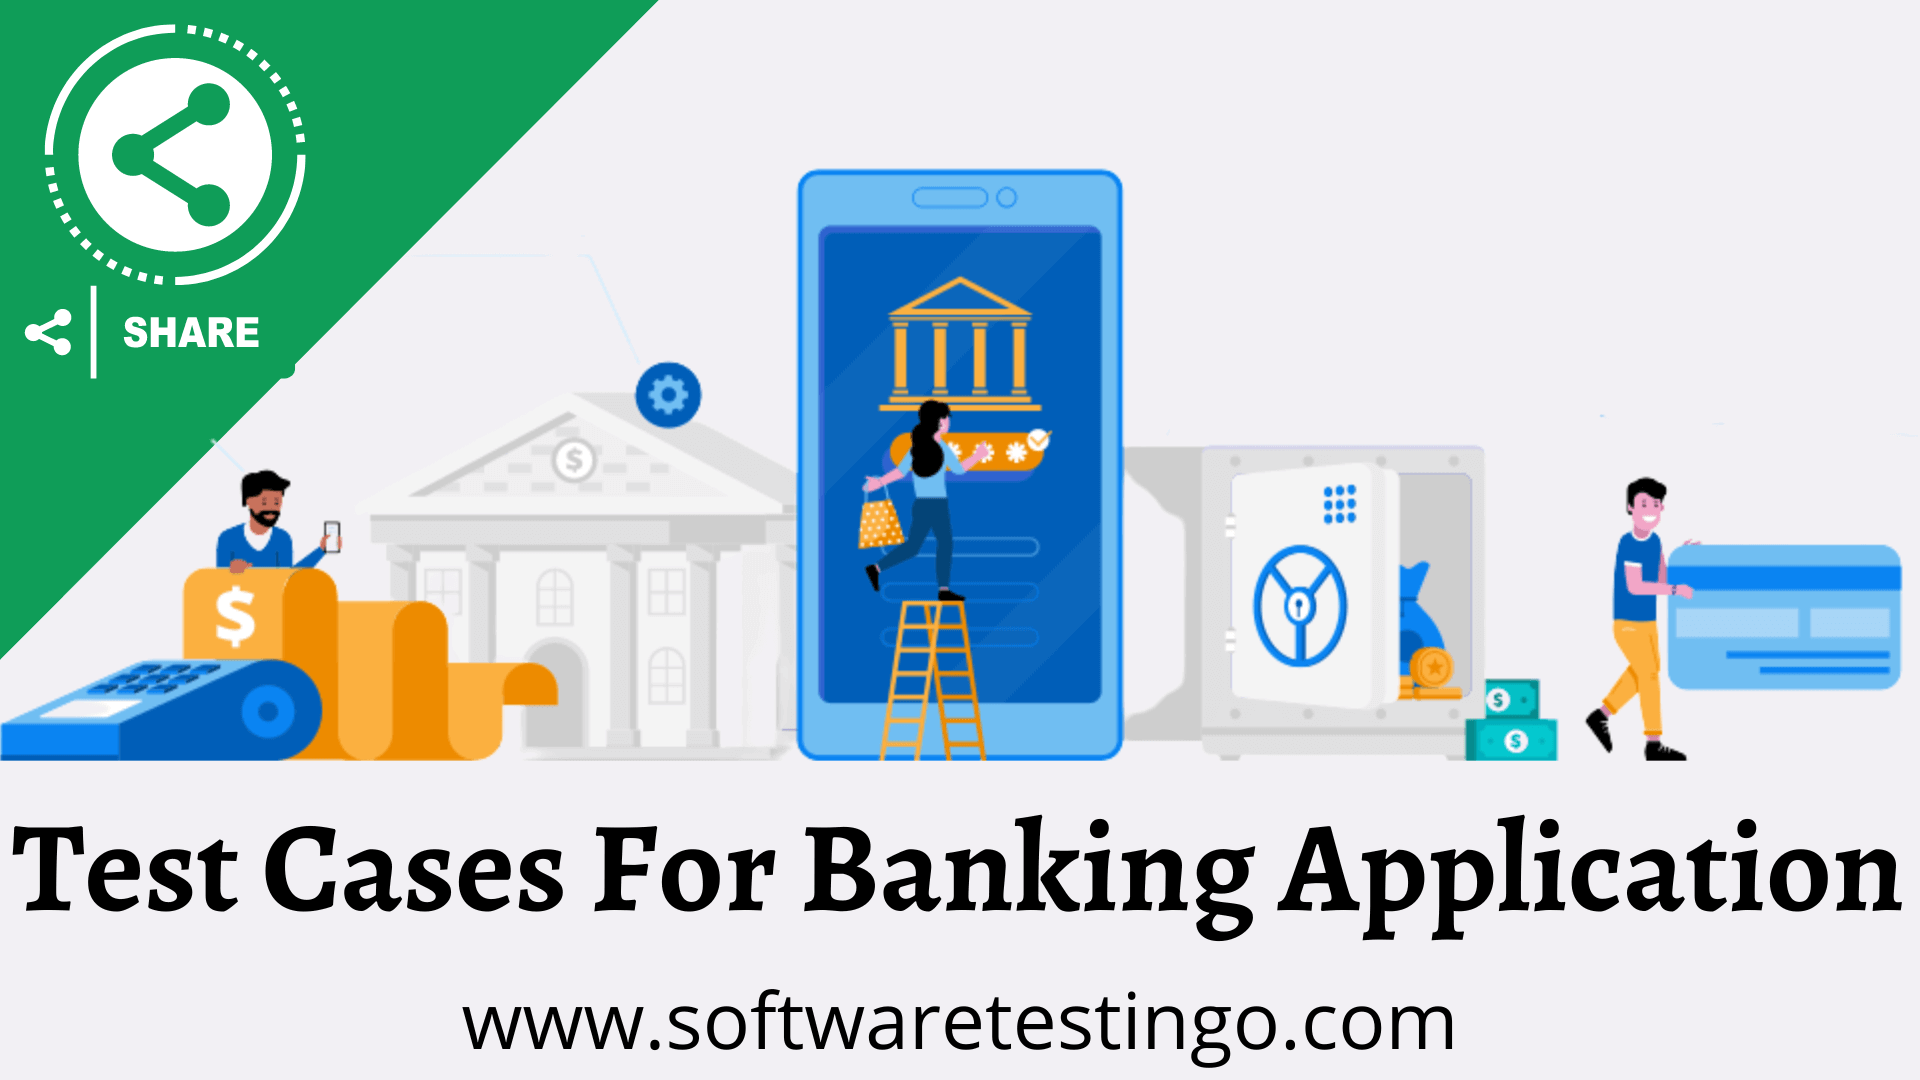 Test Cases For Banking Application